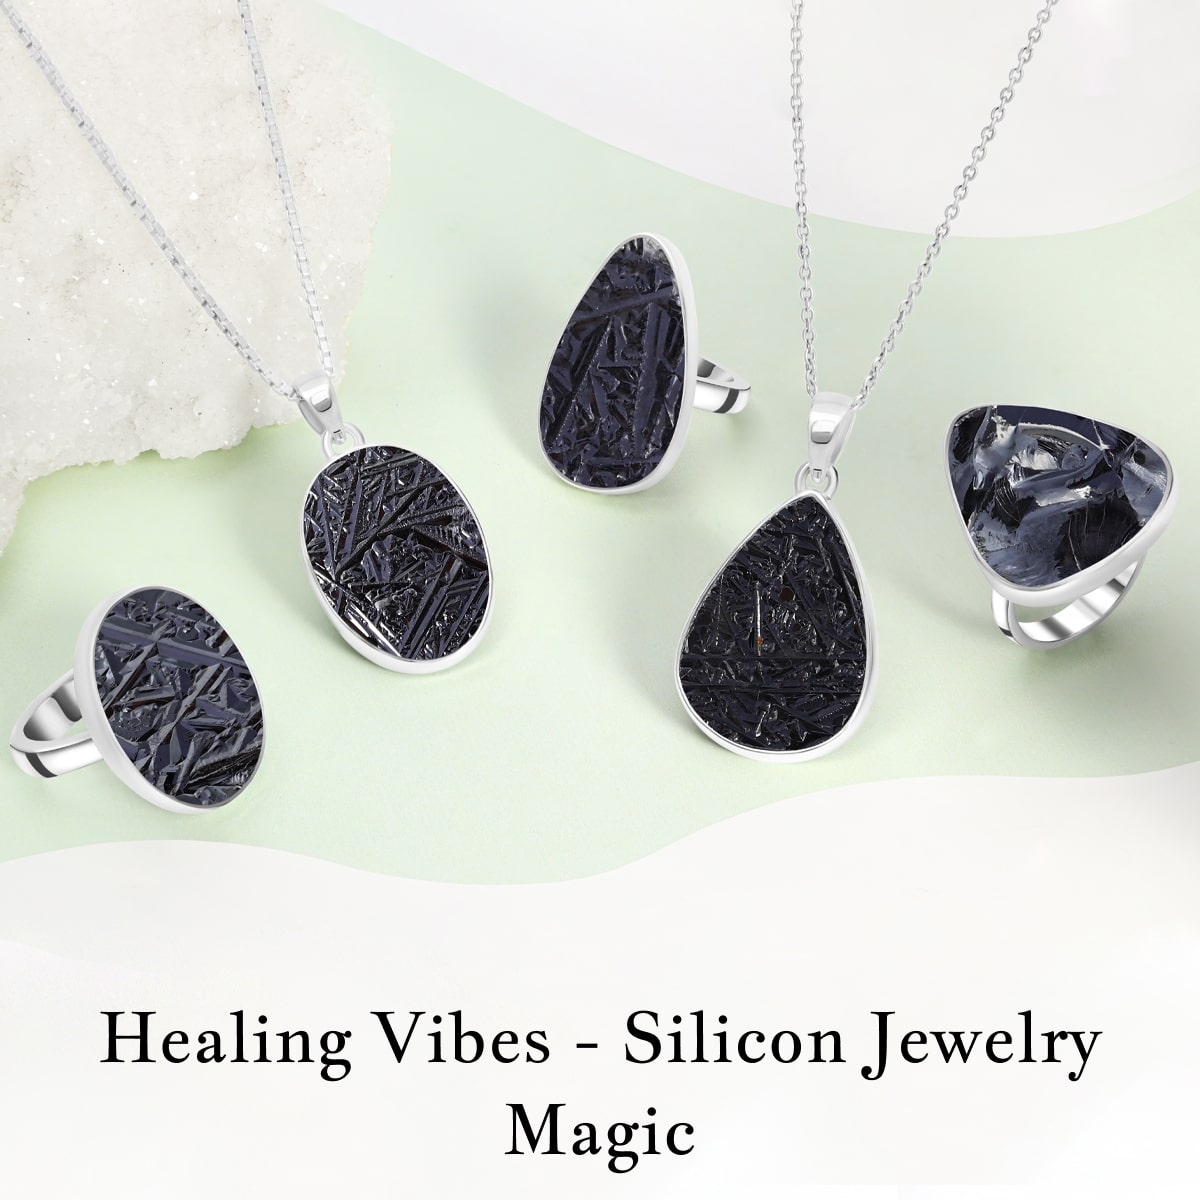 Healing Properties of Silicon Jewelry